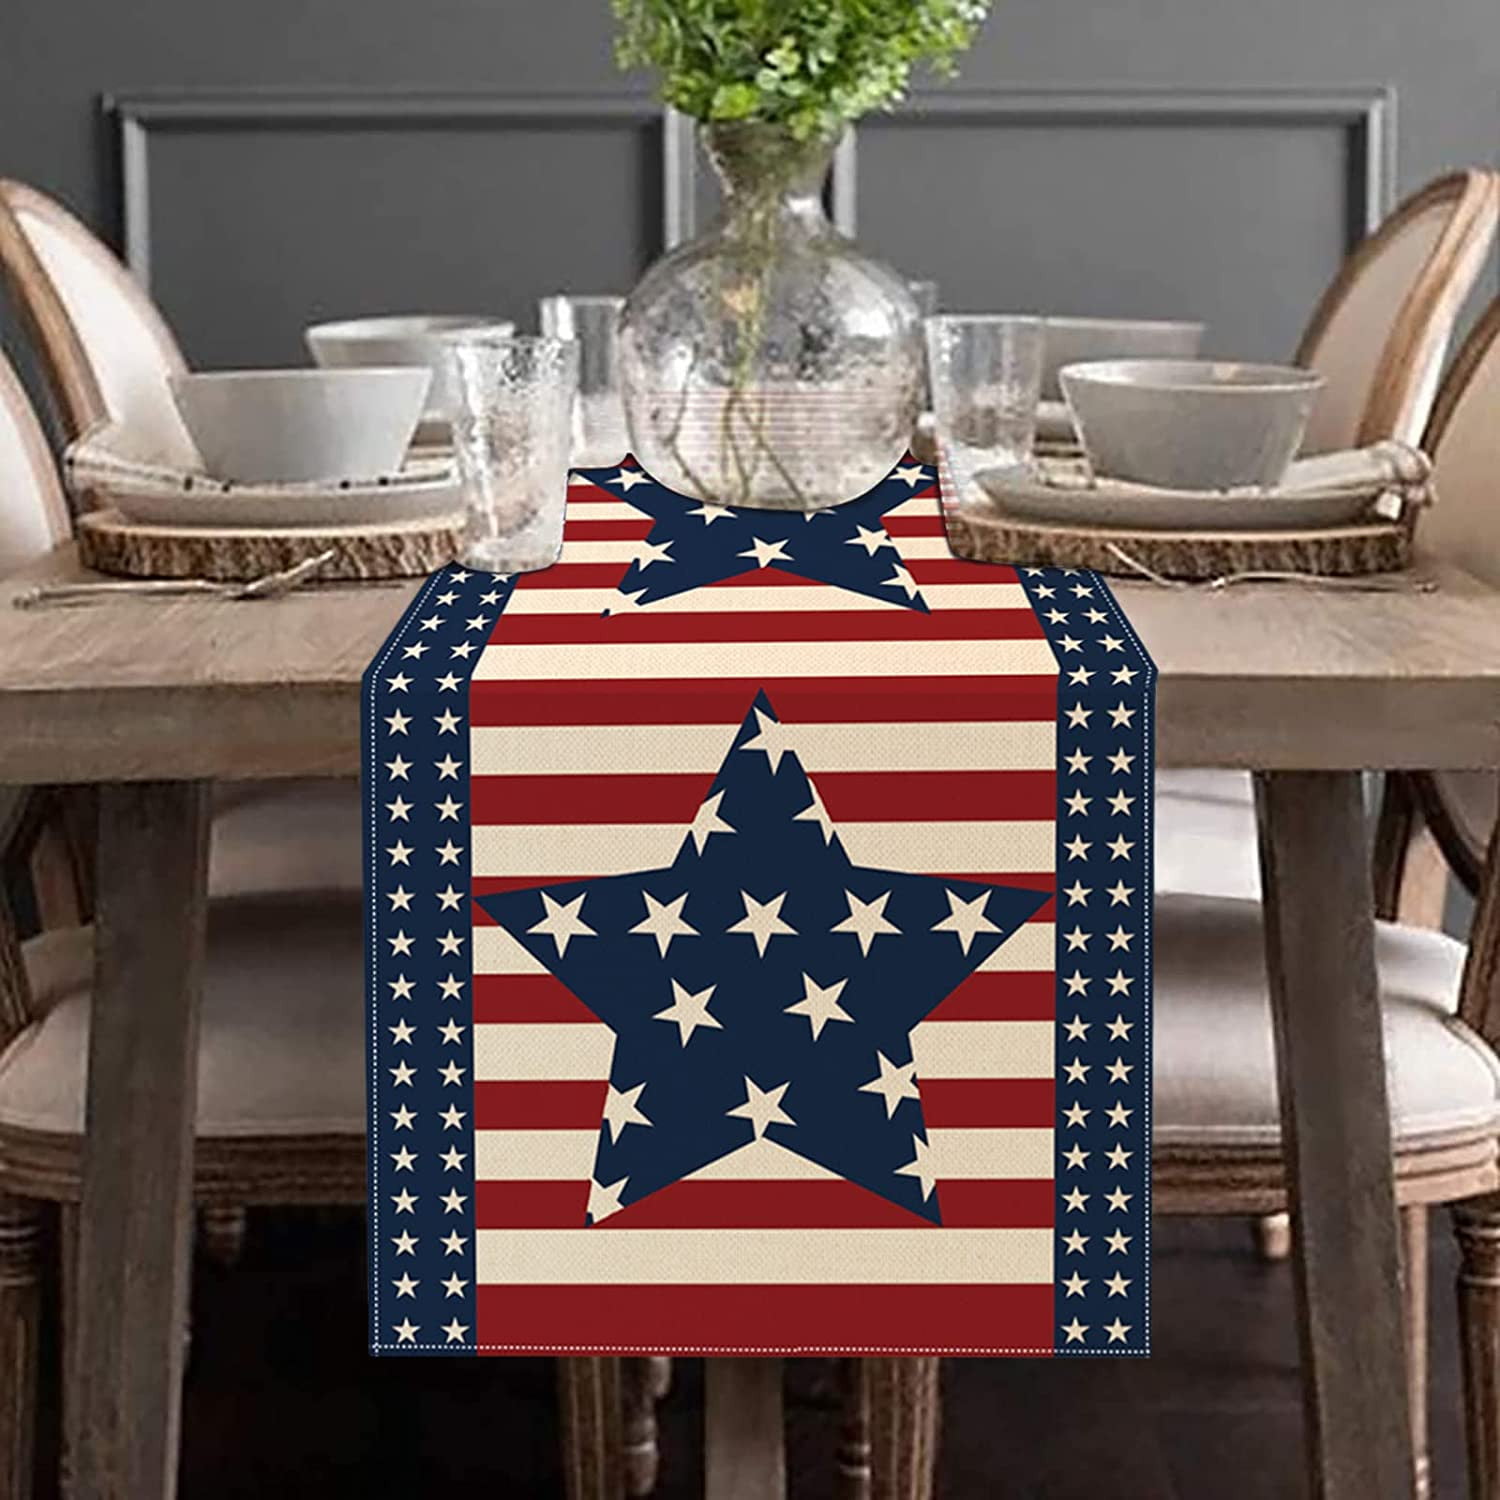 Americana Home Decor Patriotic Table Runner 4th of July Memorial Day Labor Day Table Runner Farmhouse Table Runner